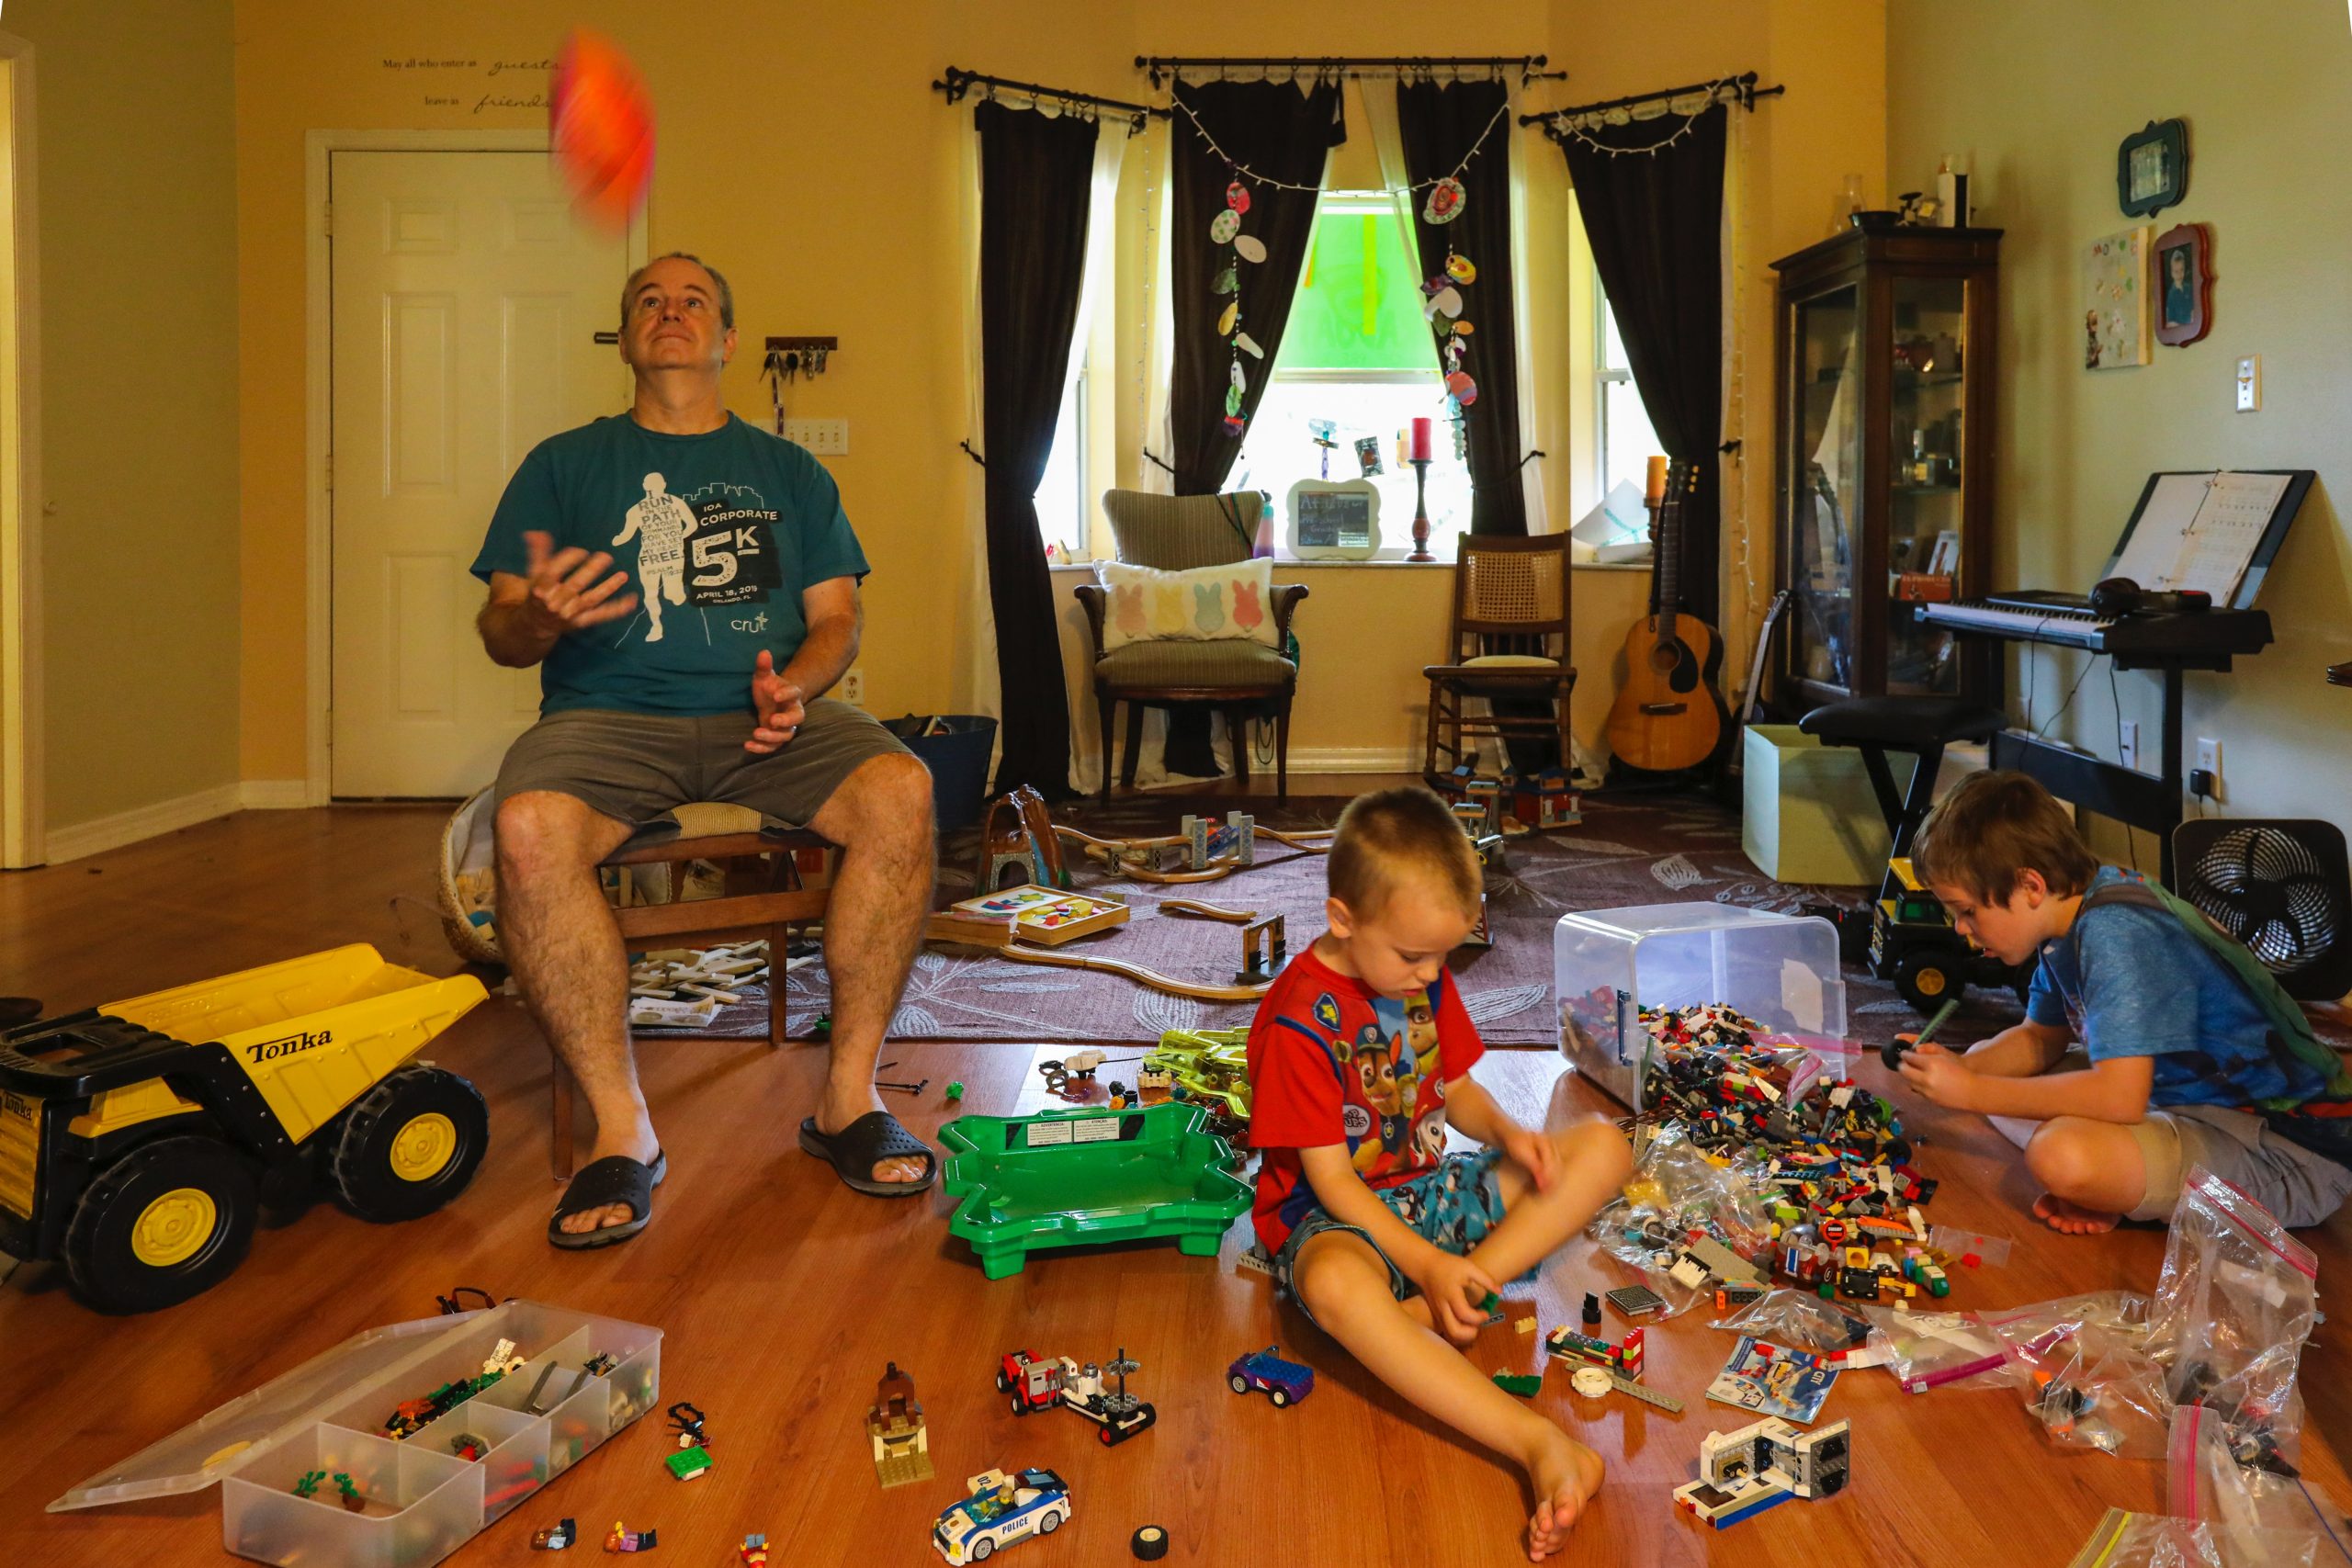 Male parent with kids surrounded by children's toys